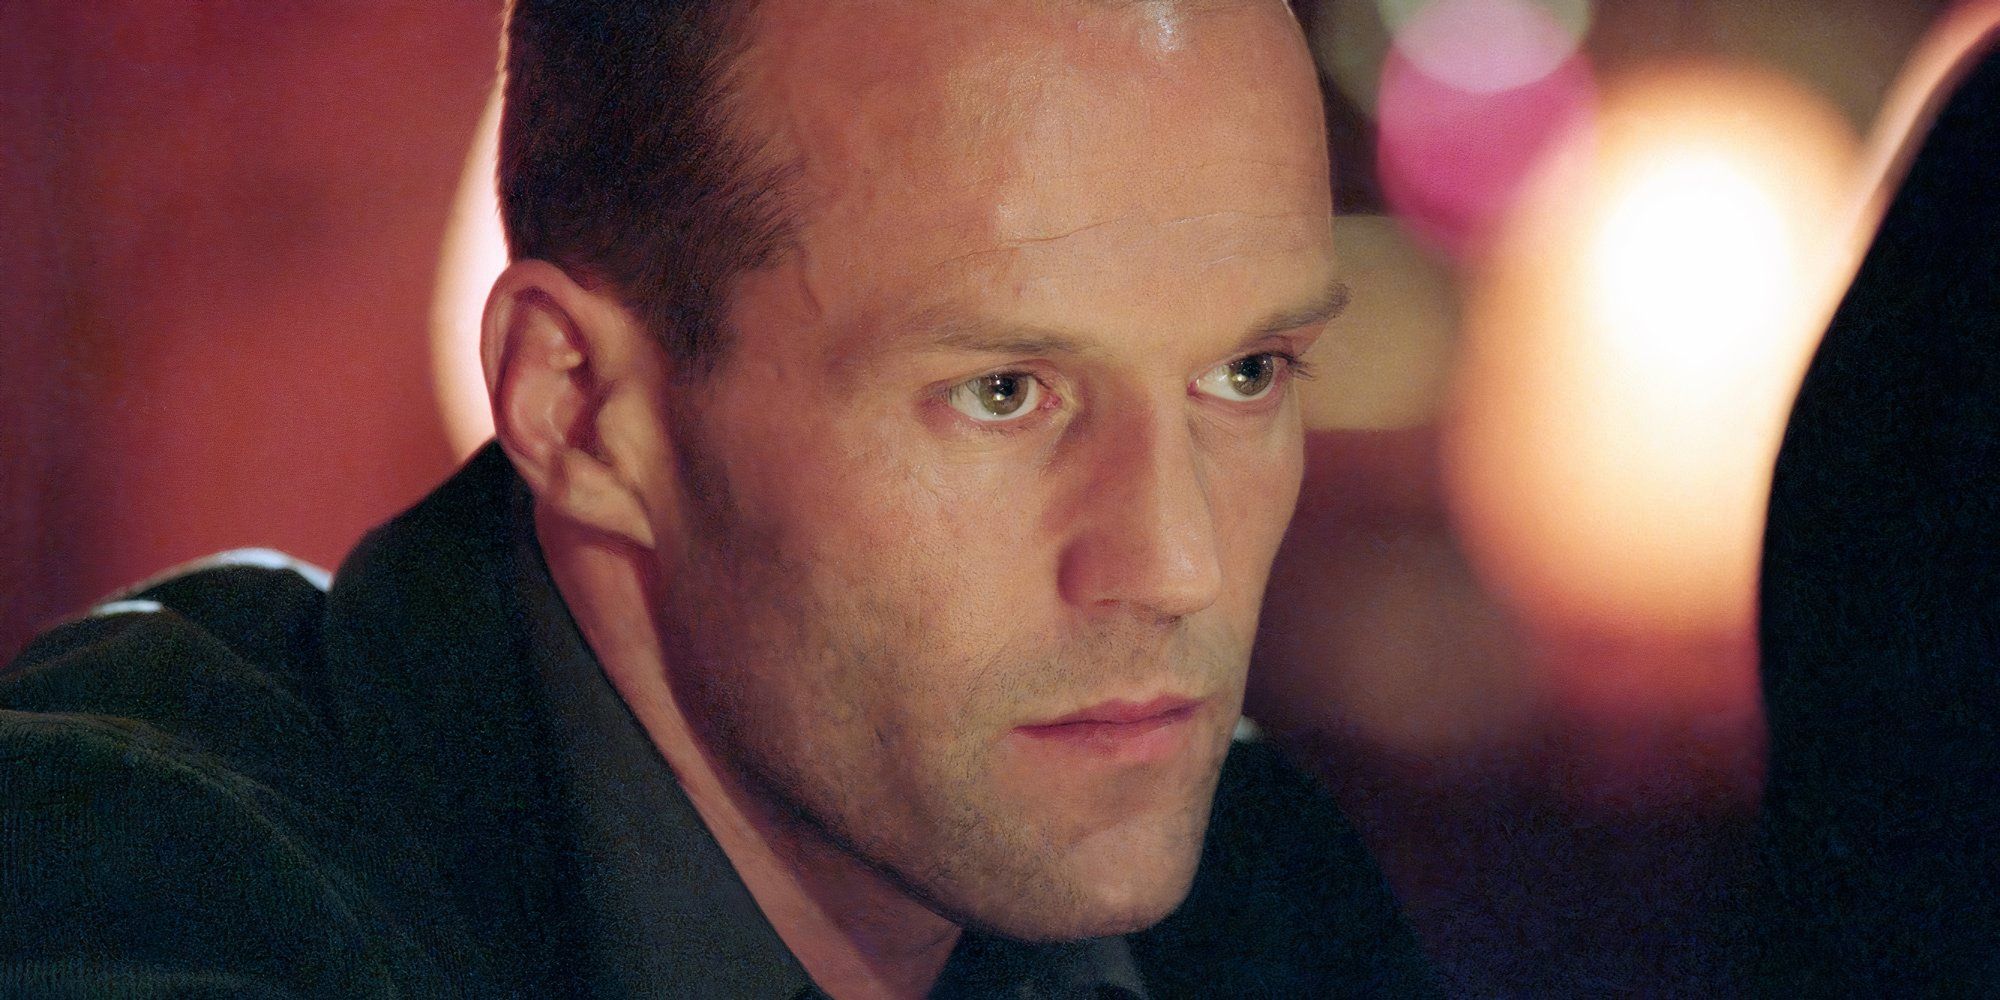 A close-up shot of Jason Statham looks serious as Frank Martin in The Transporter.